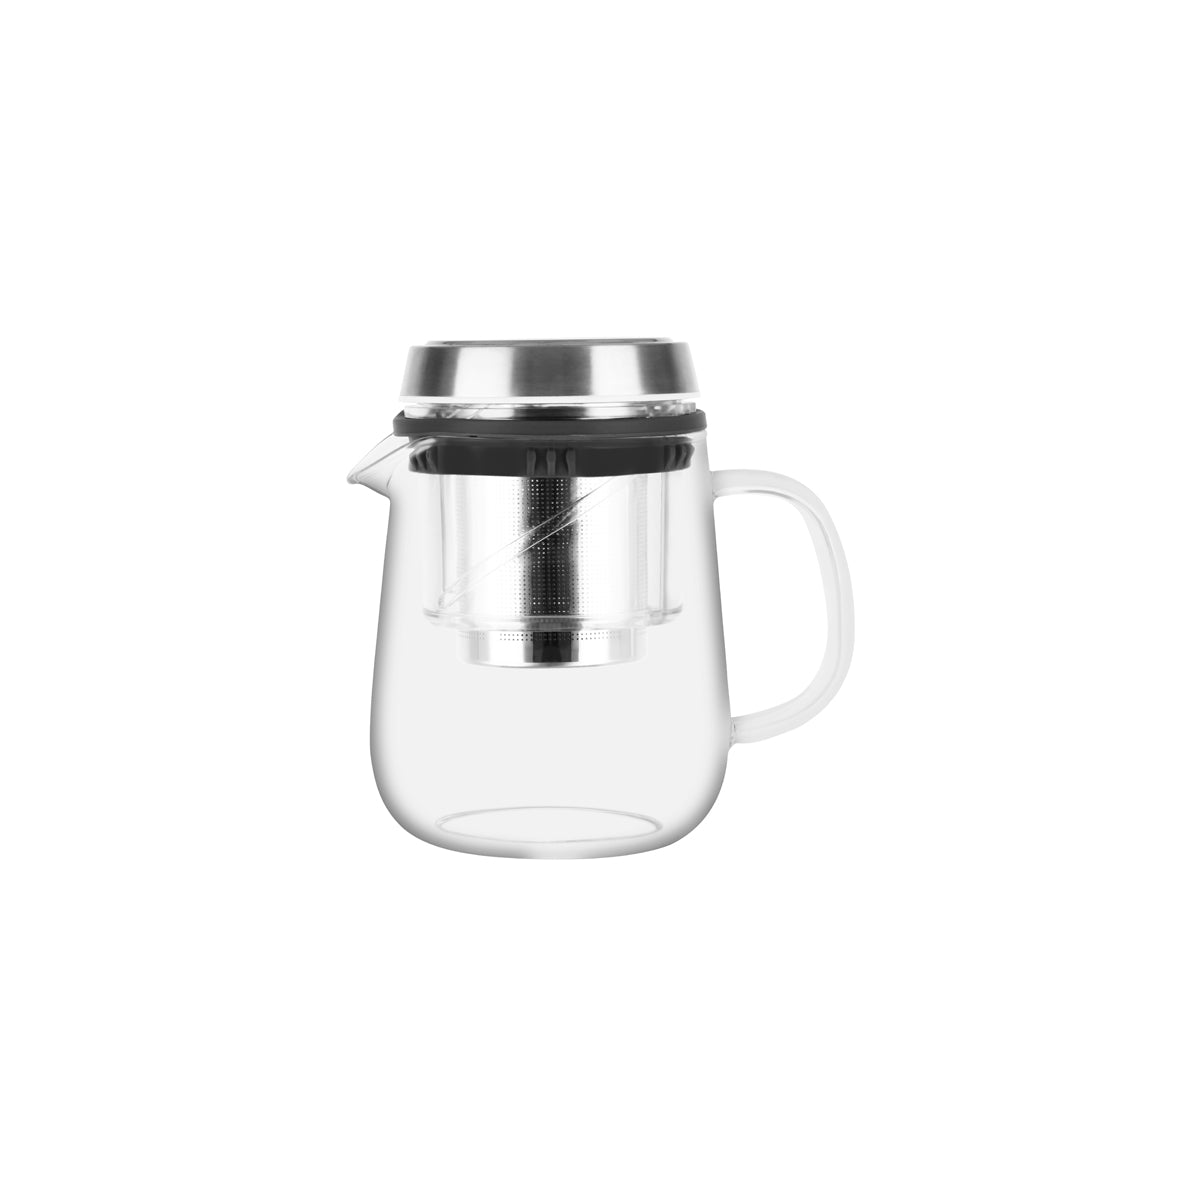 BW9122 Brew Infusion Teapot With Screw Infuser 600ml Tomkin Australia Hospitality Supplies